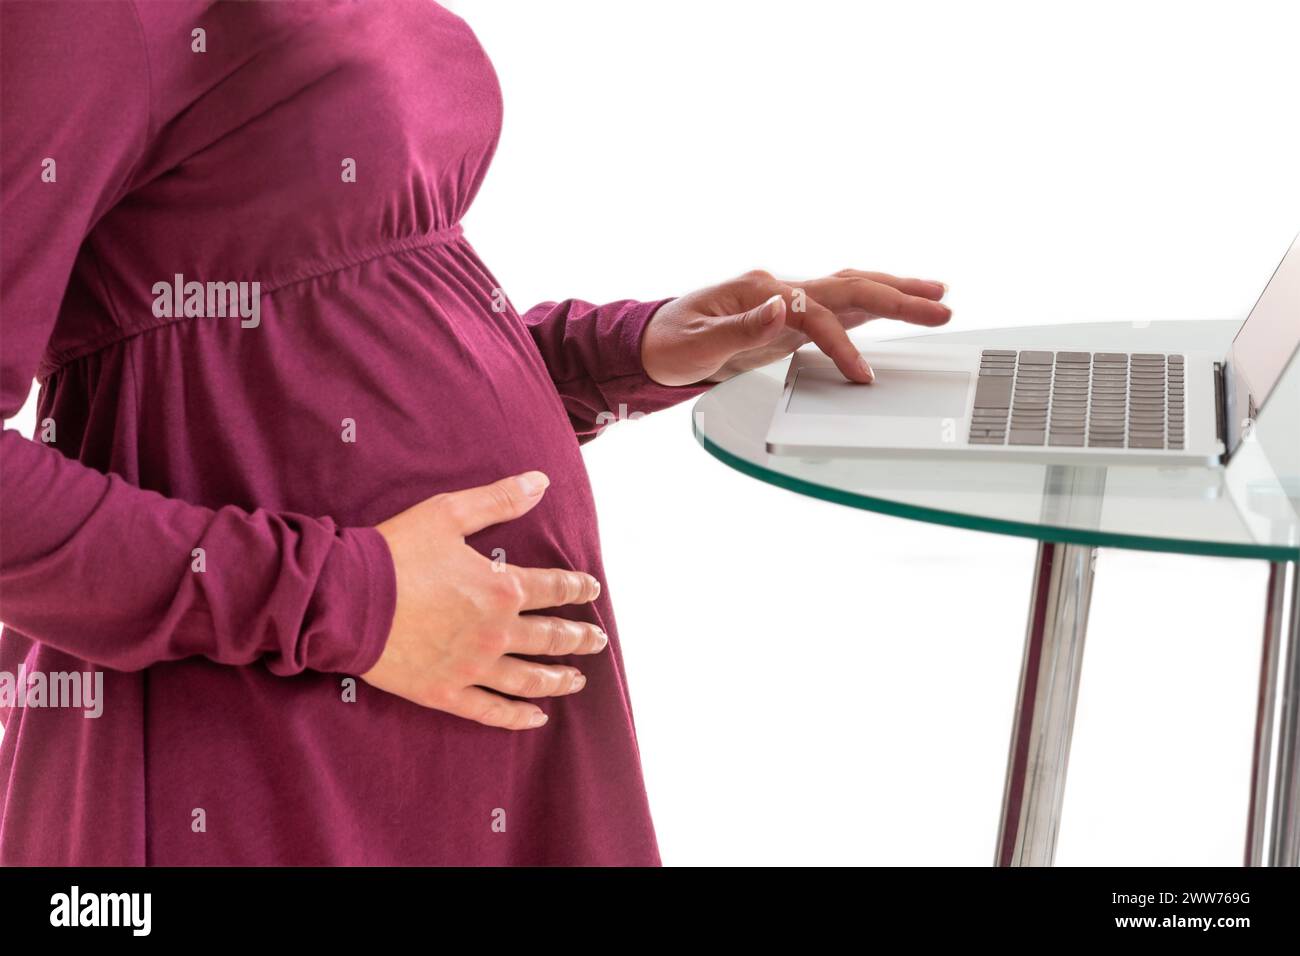 Close up-Hand on stomach, other on computer keyboard. Stock Photo